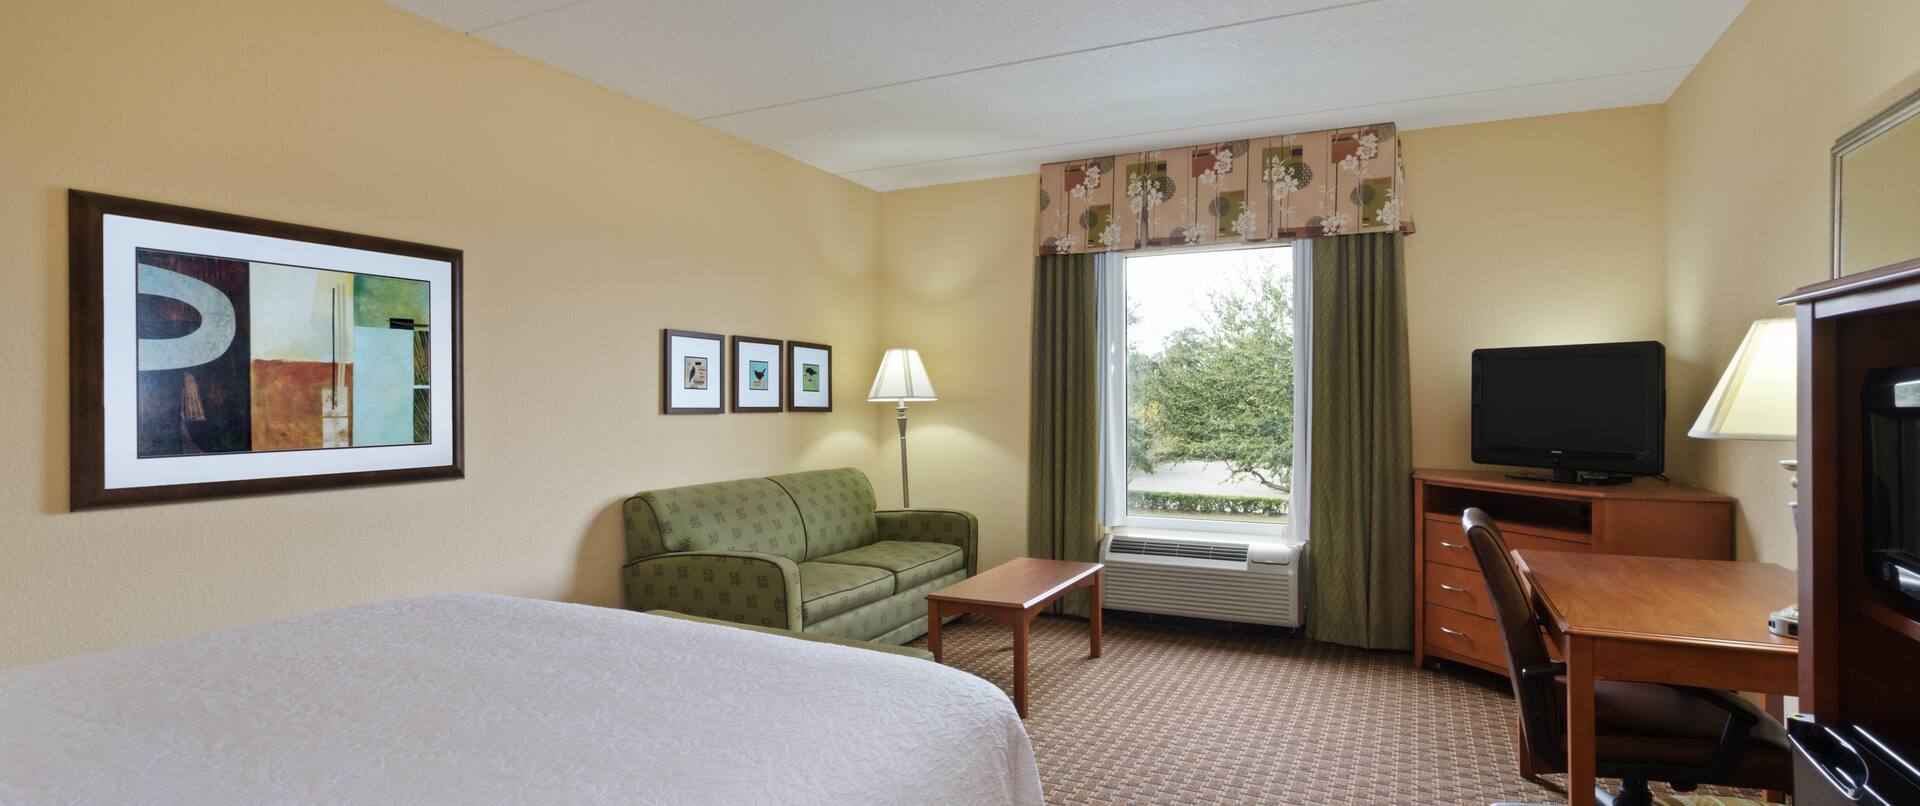 King Bed, Sleeper Sofa, Window With Open Drapes, TV, Work Desk, and Hospitality Center in Study Guest Room